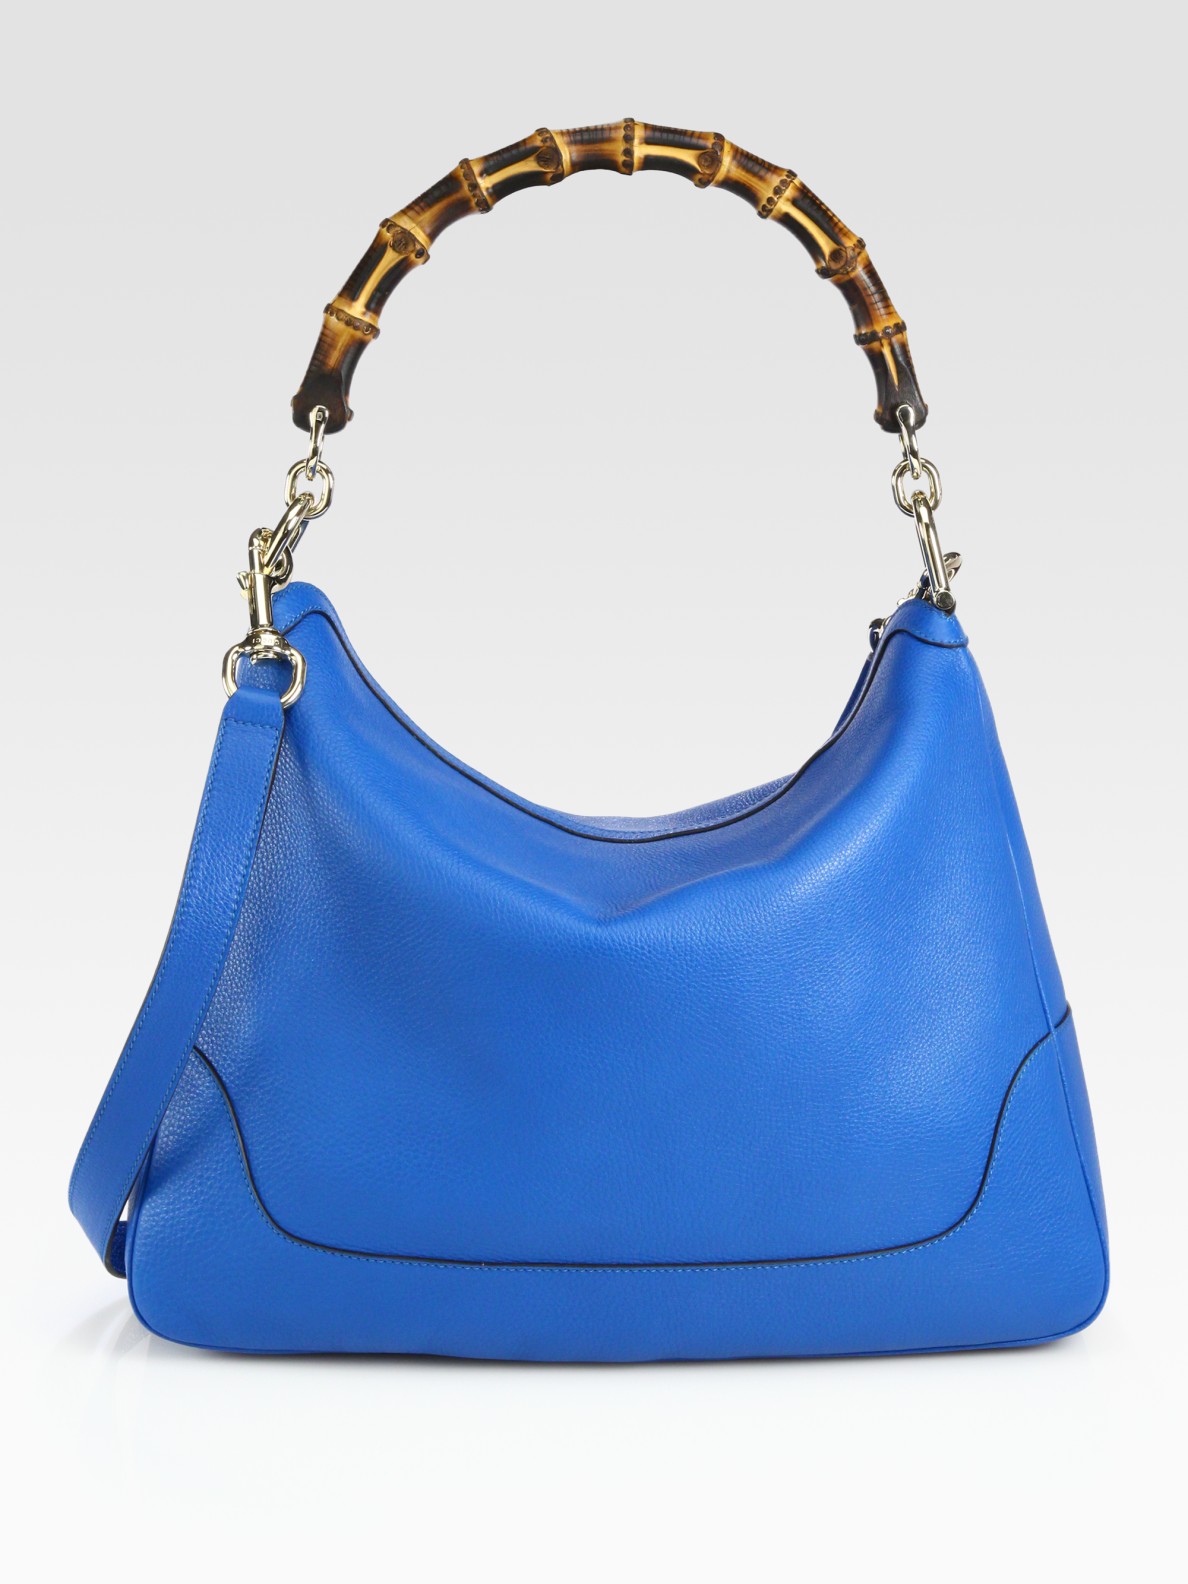 Gucci Diana Bamboo Medium Tote and Shoulder Bag in Blue | Lyst